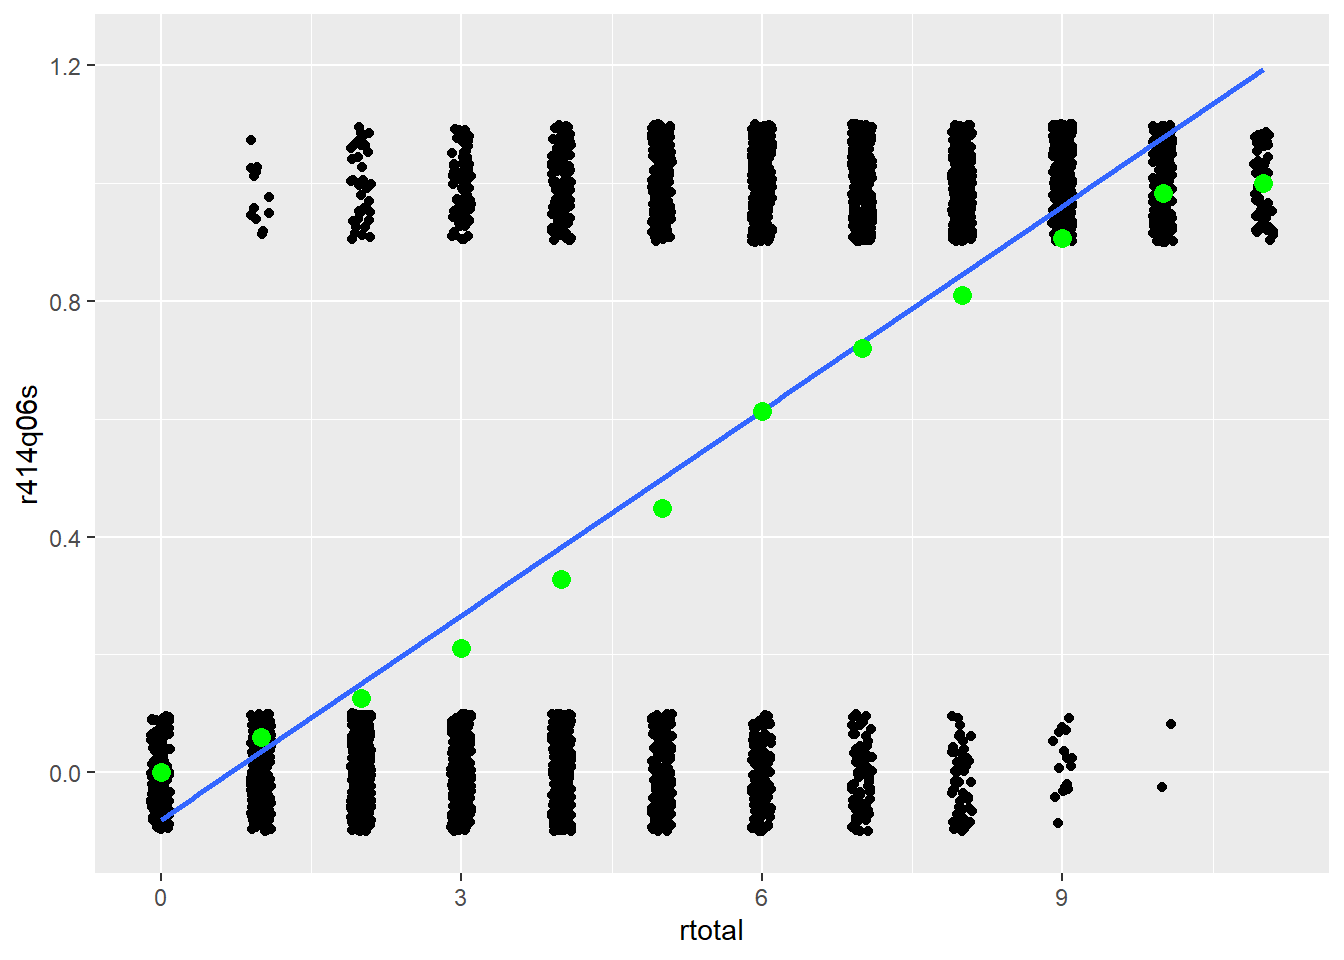 Scatter plots showing the relationship between total scores on the x-axis and scores from PISA item `r452q06s` on the y-axis. Lines represent the relationship between the construct and item scores for CTT (straight) and IRT (curved).